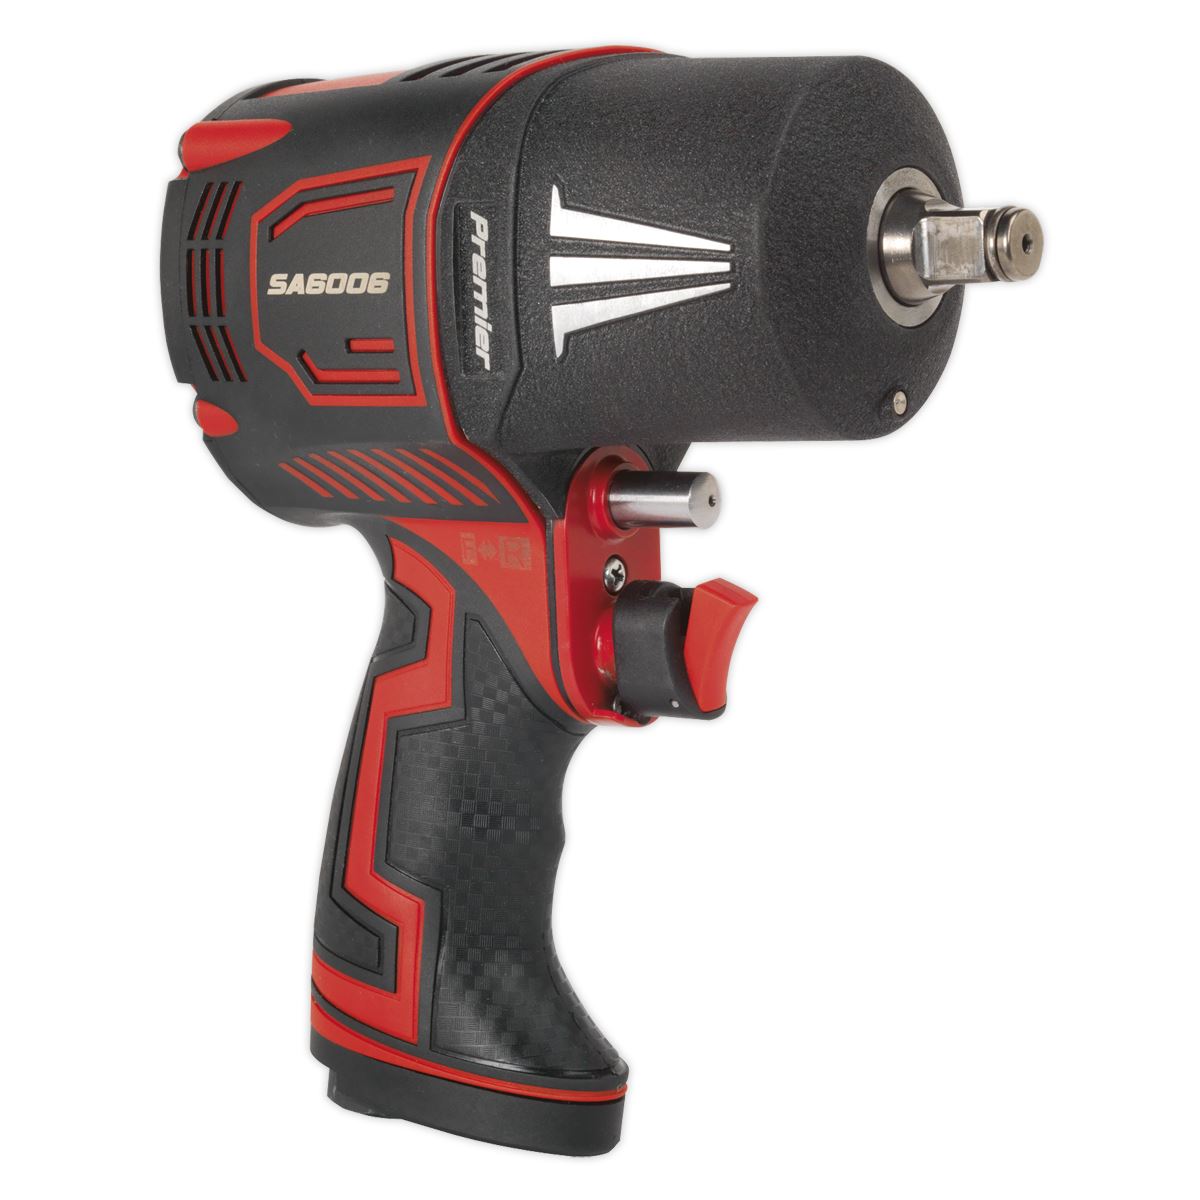 Sealey Premier Composite Air Impact Wrench 1/2"Sq Drive - Twin Hammer